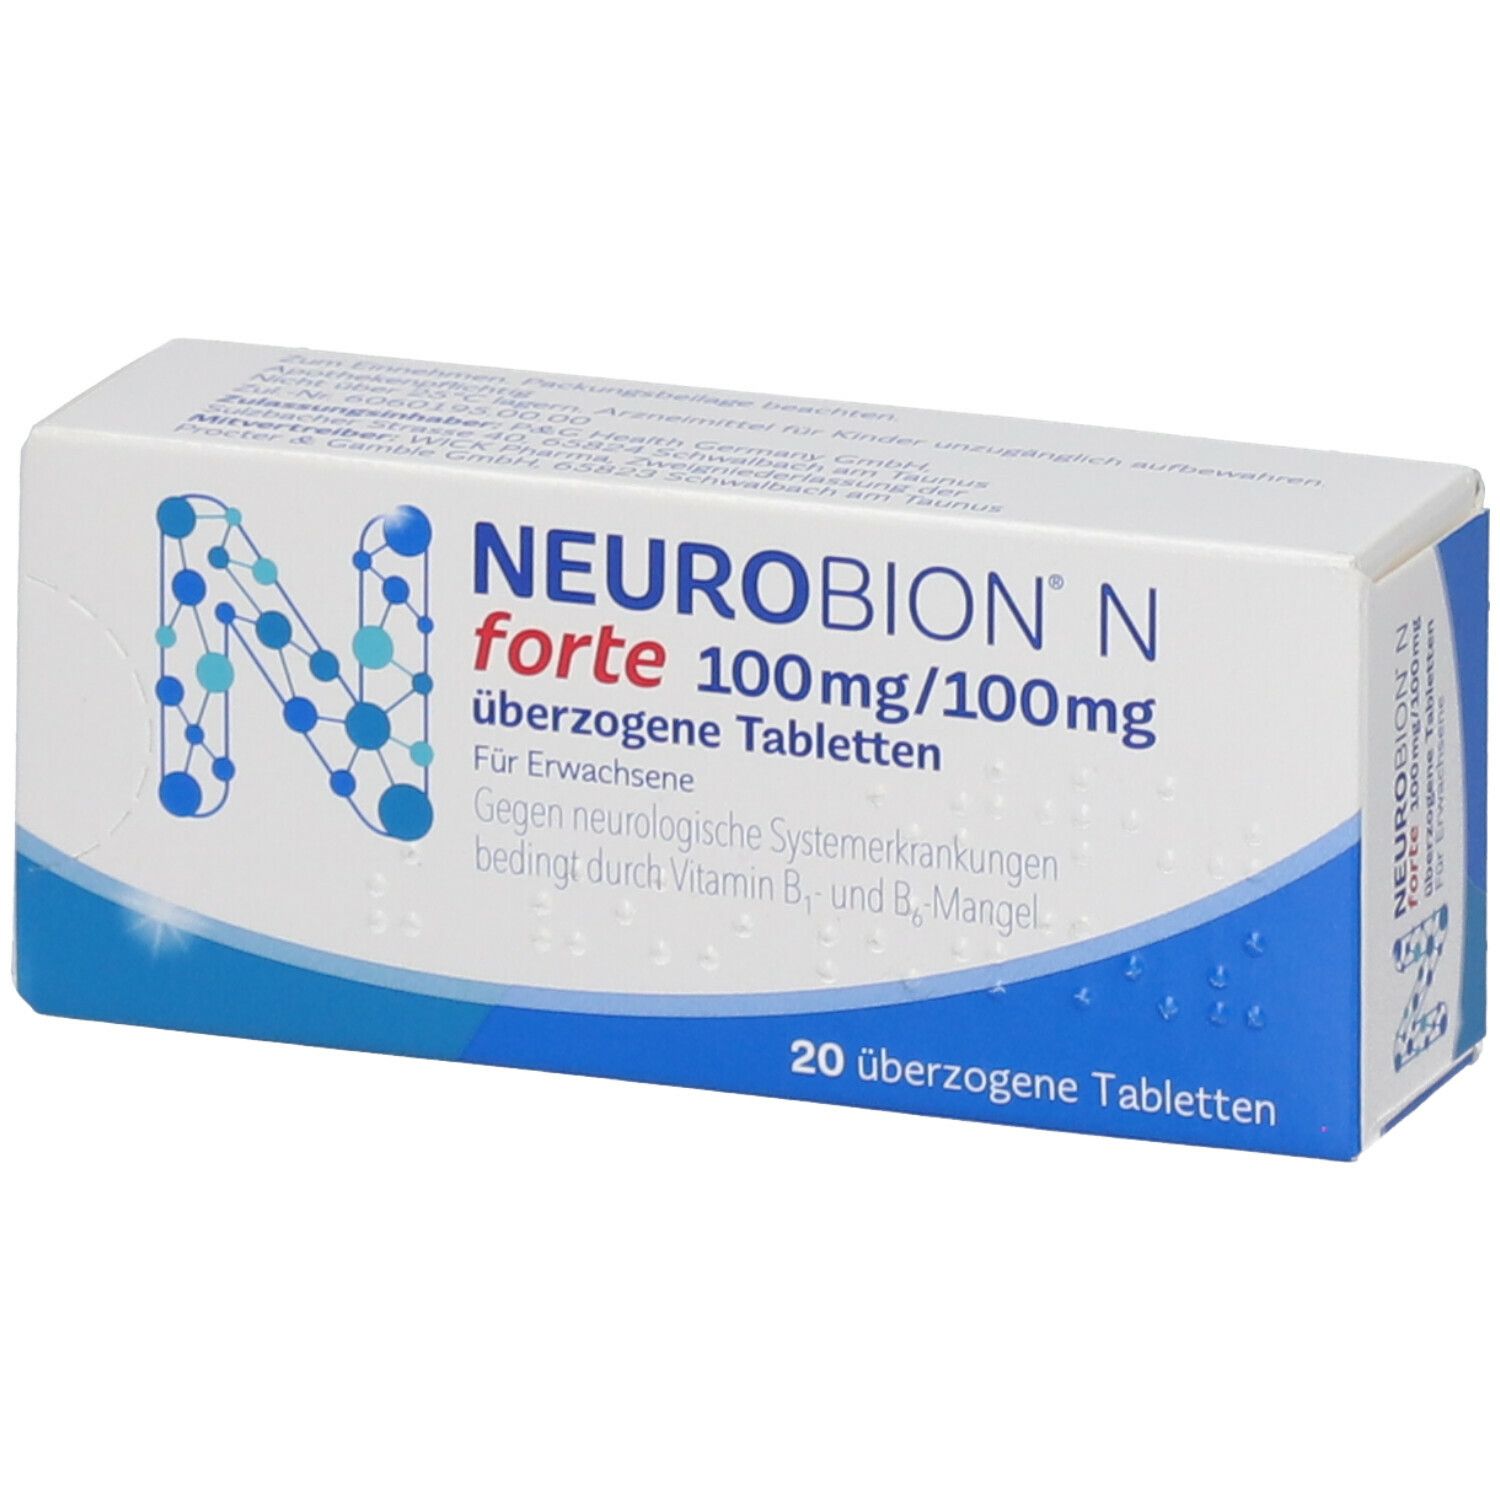 Neurobion® N forte Dragees